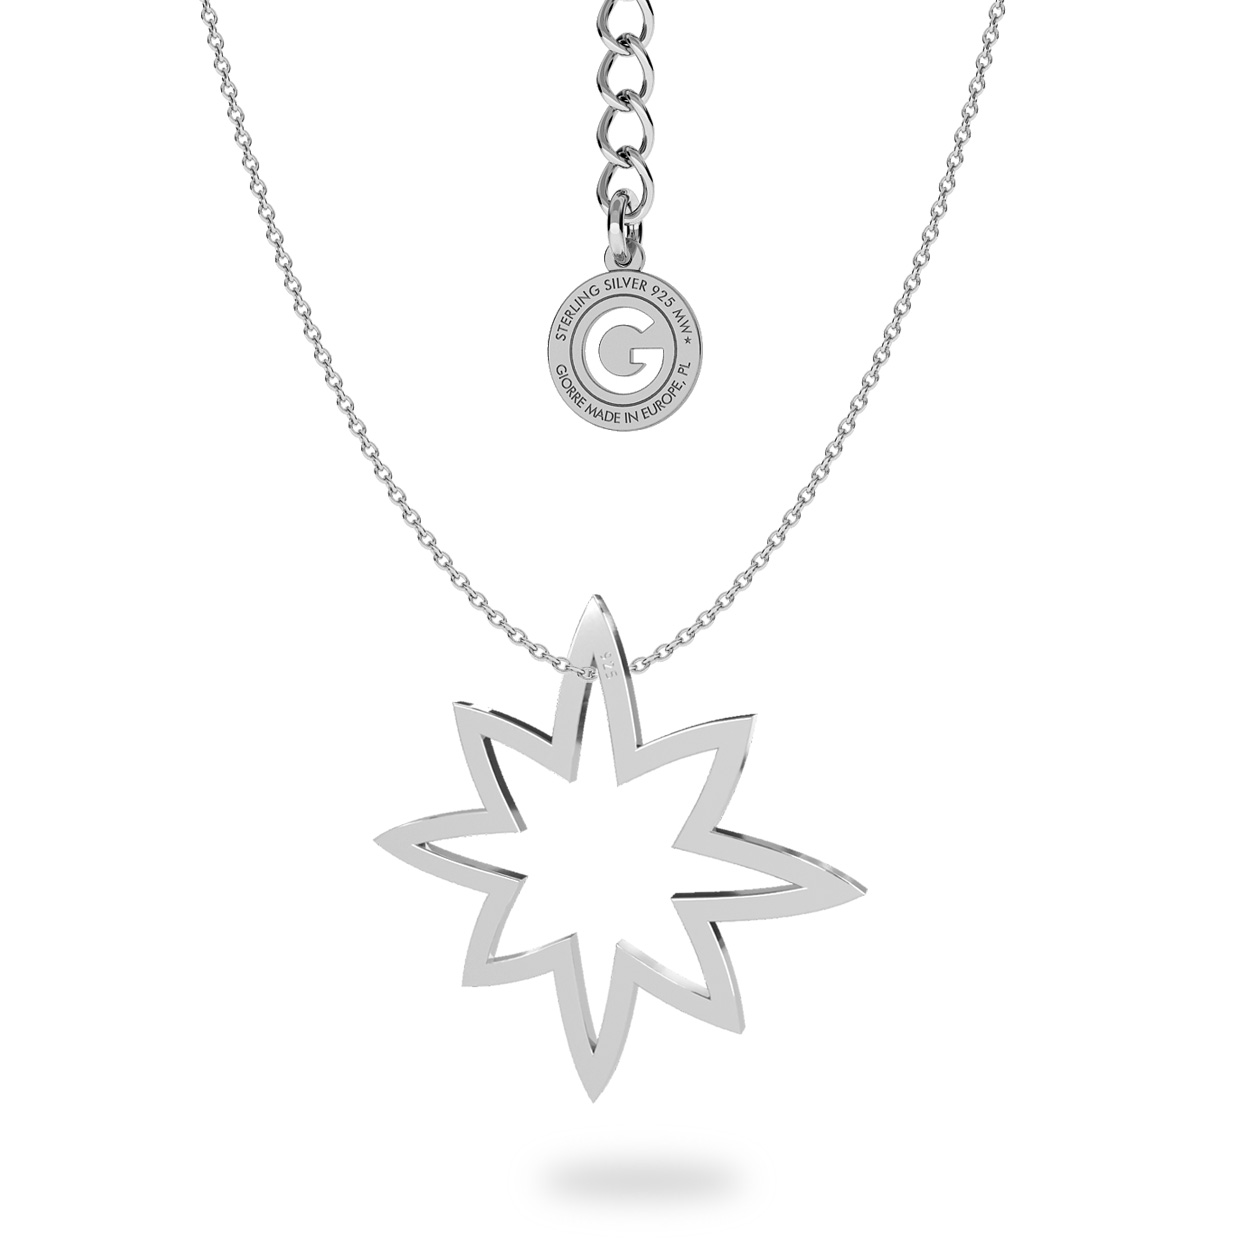 STARFISH NECKLACE STERLING SILVER 925